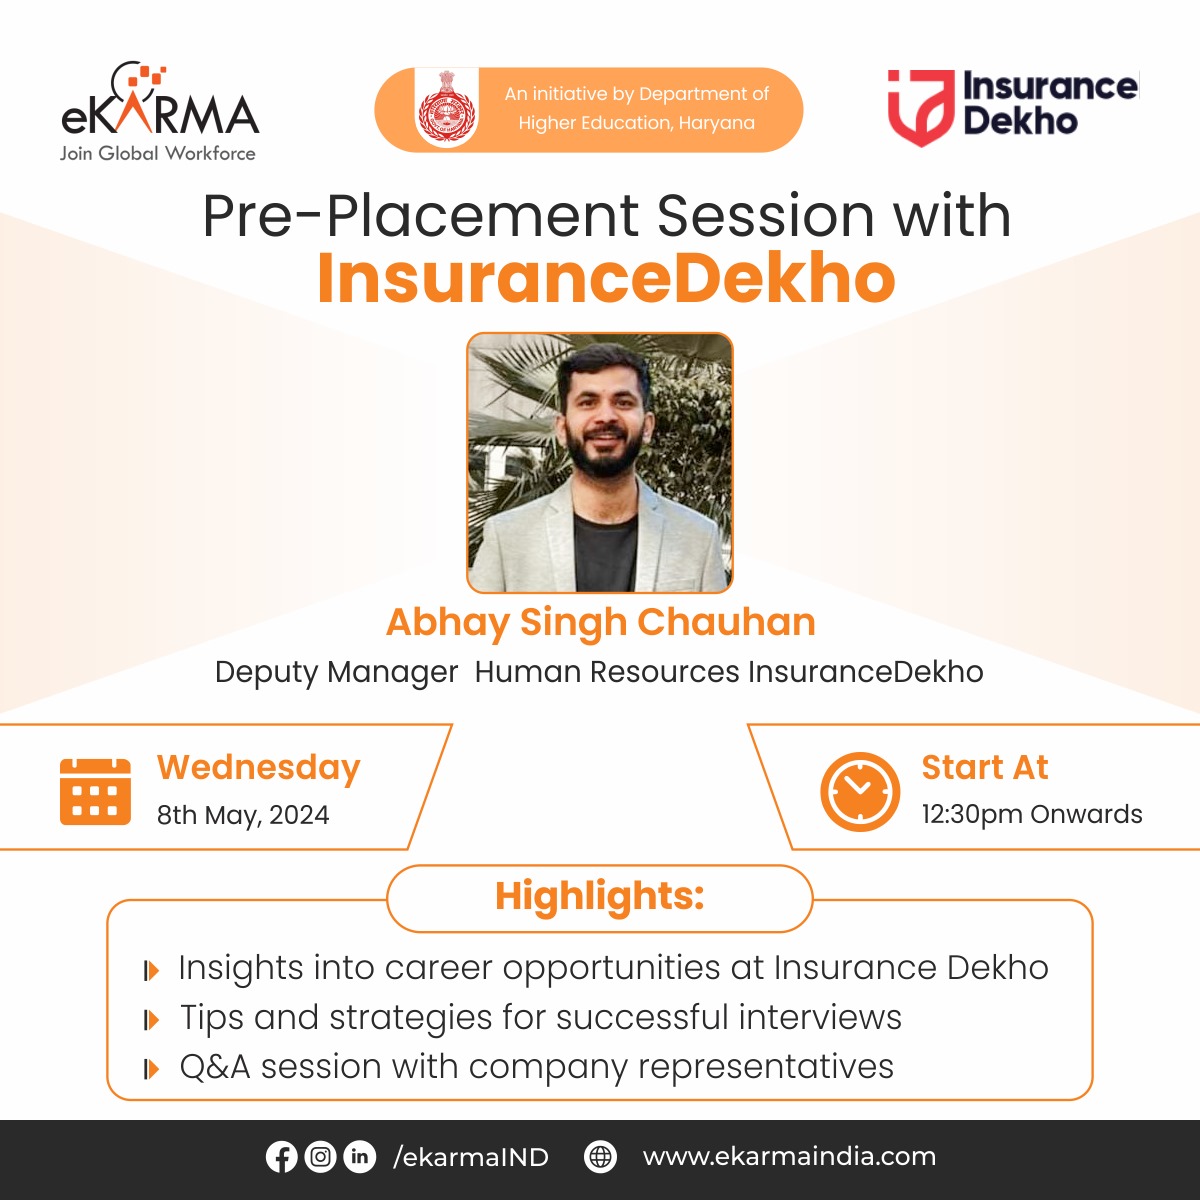 Join us for an exclusive pre-placement session with Insurance Dekho and unlock the secrets to acing your job interviews! Gain valuable insights into the company's culture, expectations, and tips for success straight from the experts. 
#PrePlacement #CareerPrep #InsuranceDekho